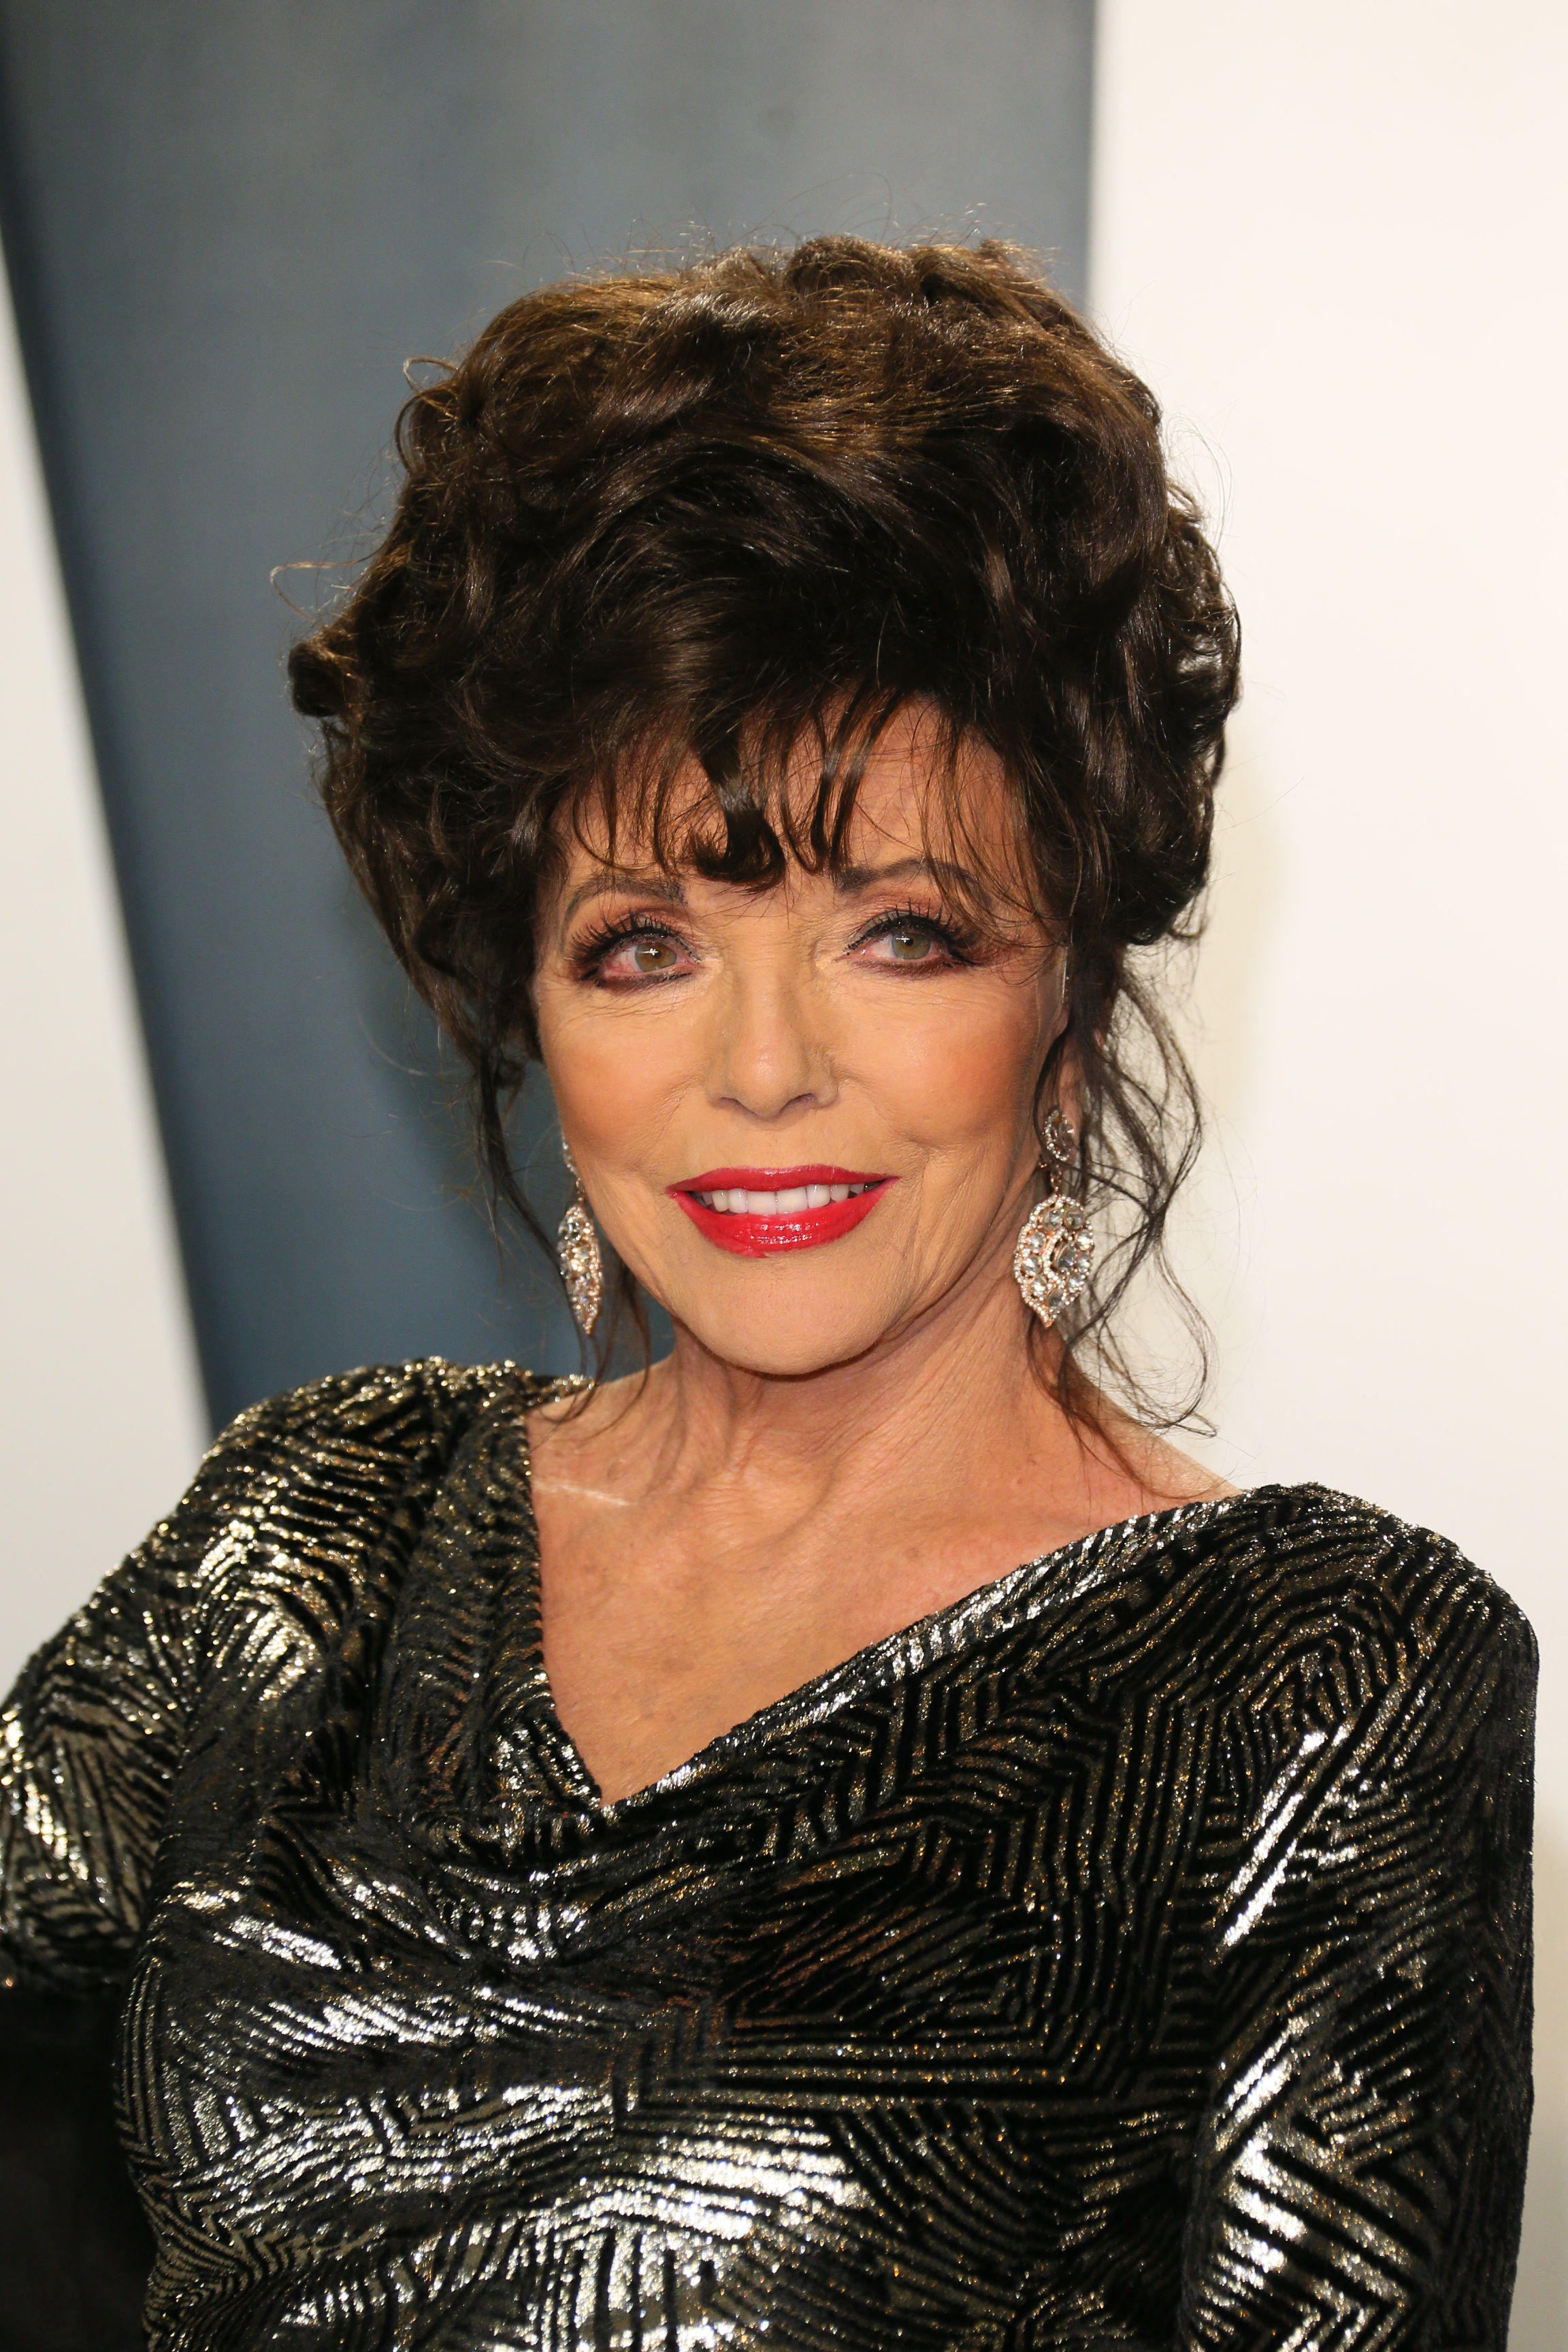 Joan Collins attended the 2020 Vanity Fair Oscar Party, hosted at The Wallis Annenberg Center for the Performing Arts in Beverly Hills, California. | Source: Getty Images